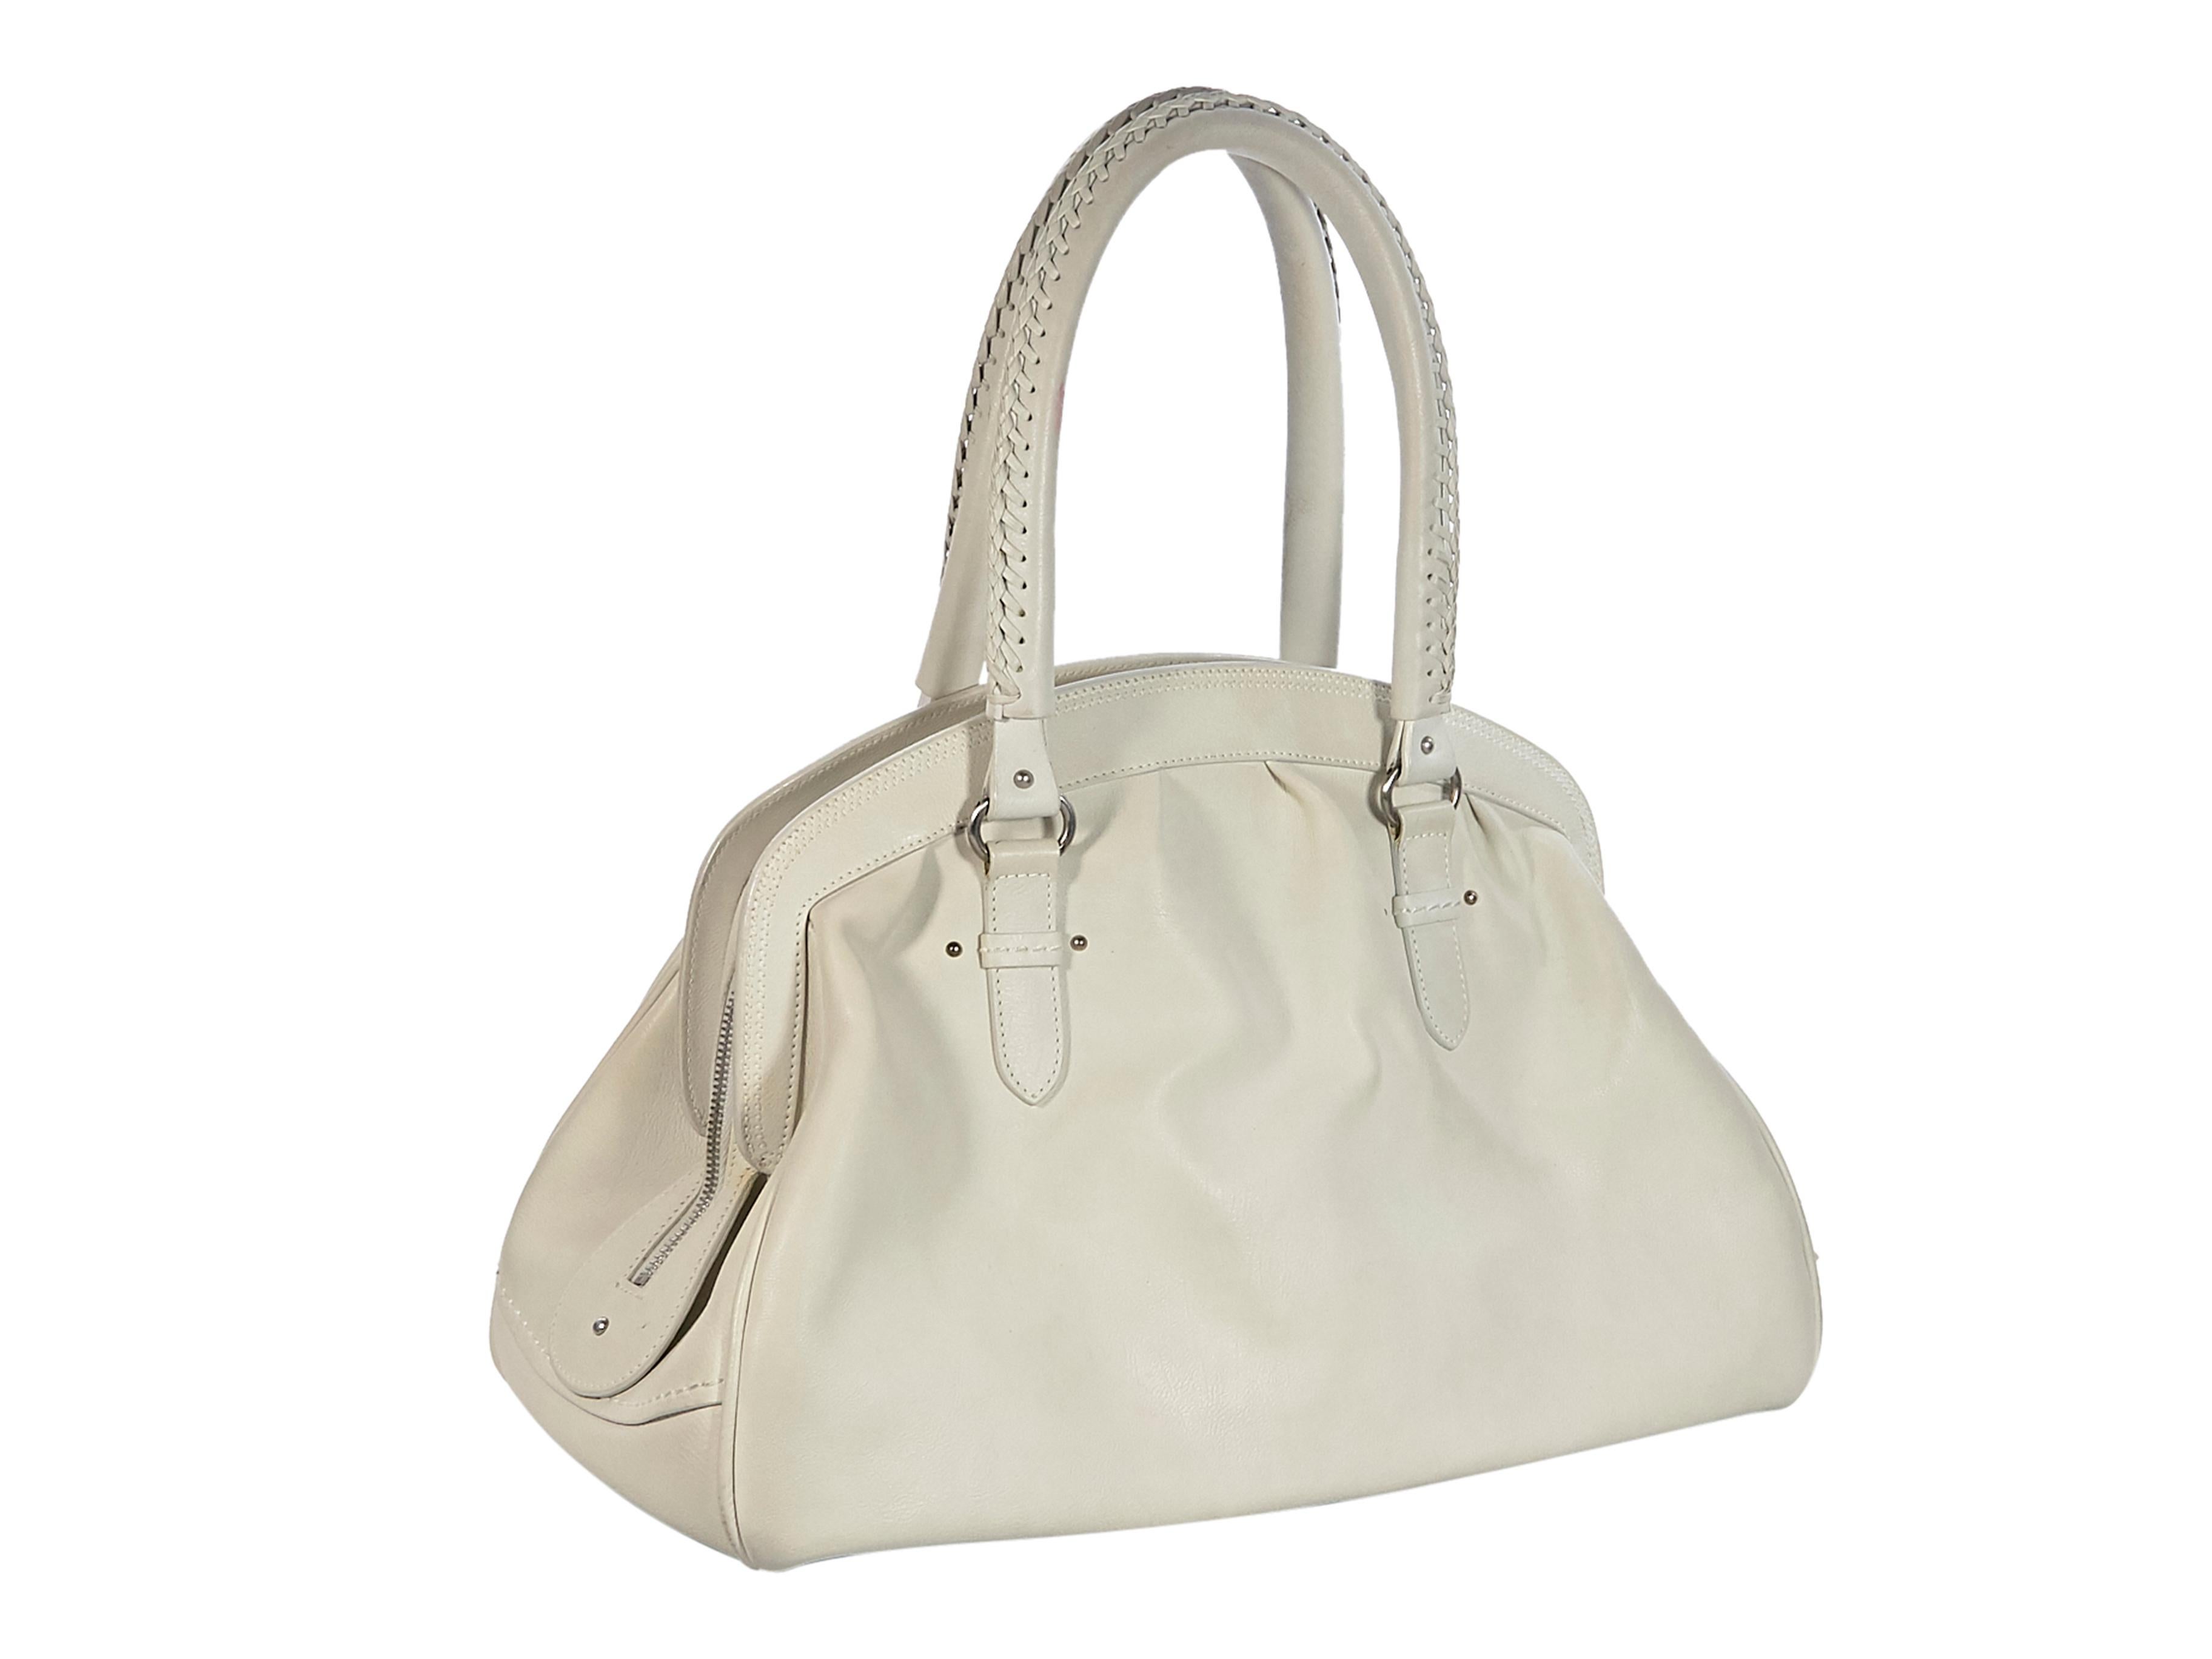 Product details:  White leather hobo bag by Christian Dior. Dual leather shoulder straps.  Zip top closure. Lined interior with inner zip pocket.  Two exterior flap pockets. Protective metal feet. Silver-tone hardware. 14.5